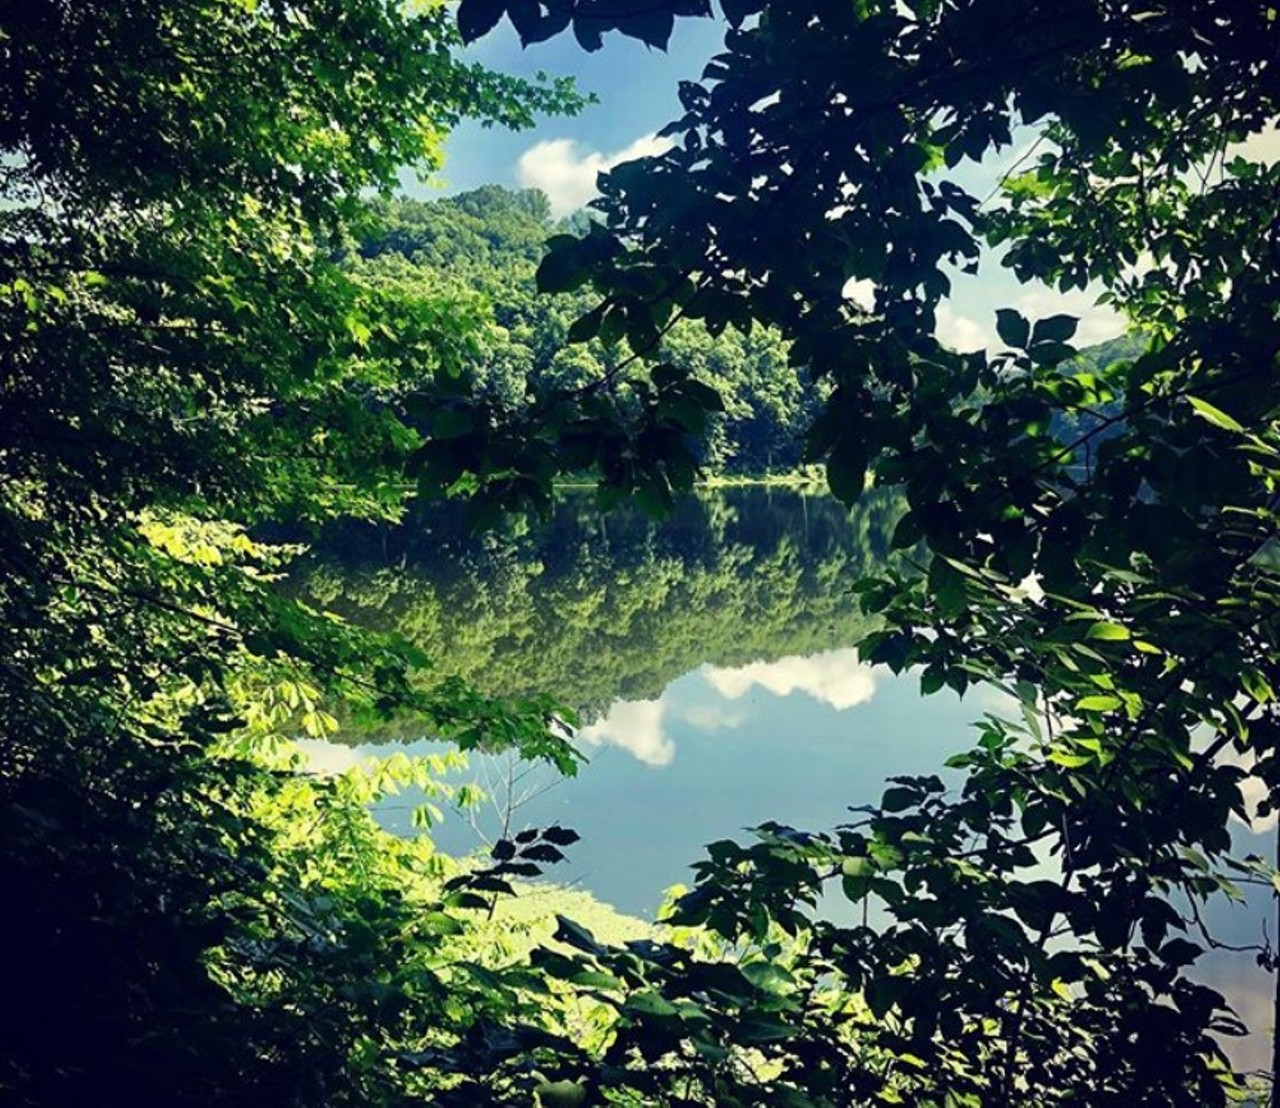 Lake Hope State Park
27331 State Route 278, McArthur, 740-596-4938
Lake Hope State Park rests in the Zaleski State Forest, and its interesting geography attracts many photographers to the park.
Photo via pjasovsky/Instagram